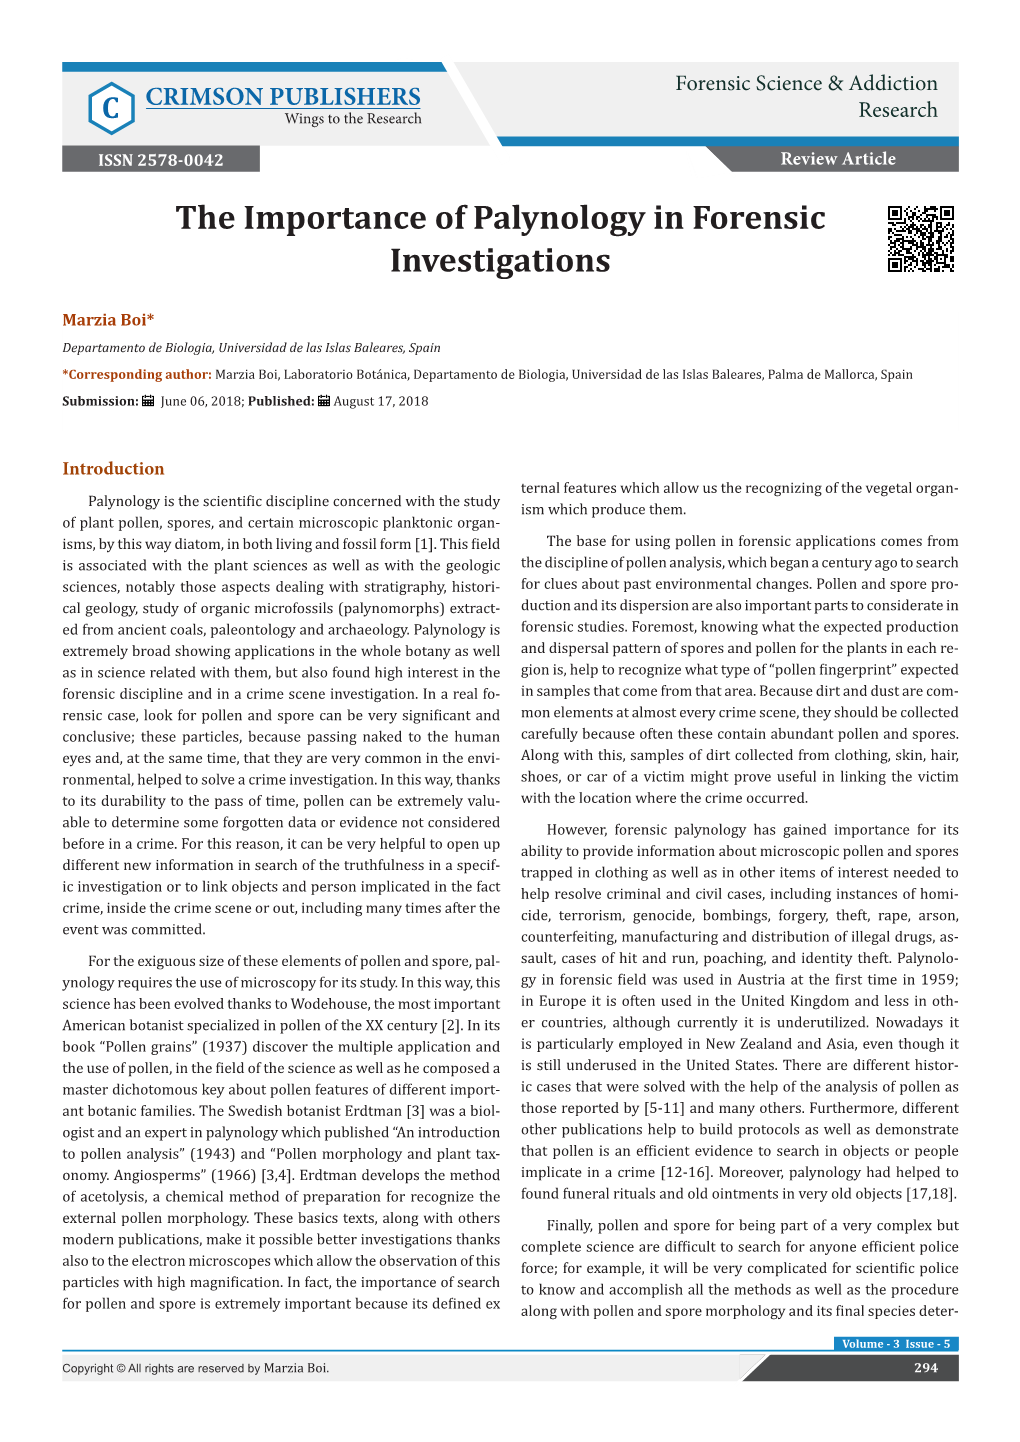 The Importance of Palynology in Forensic Investigations